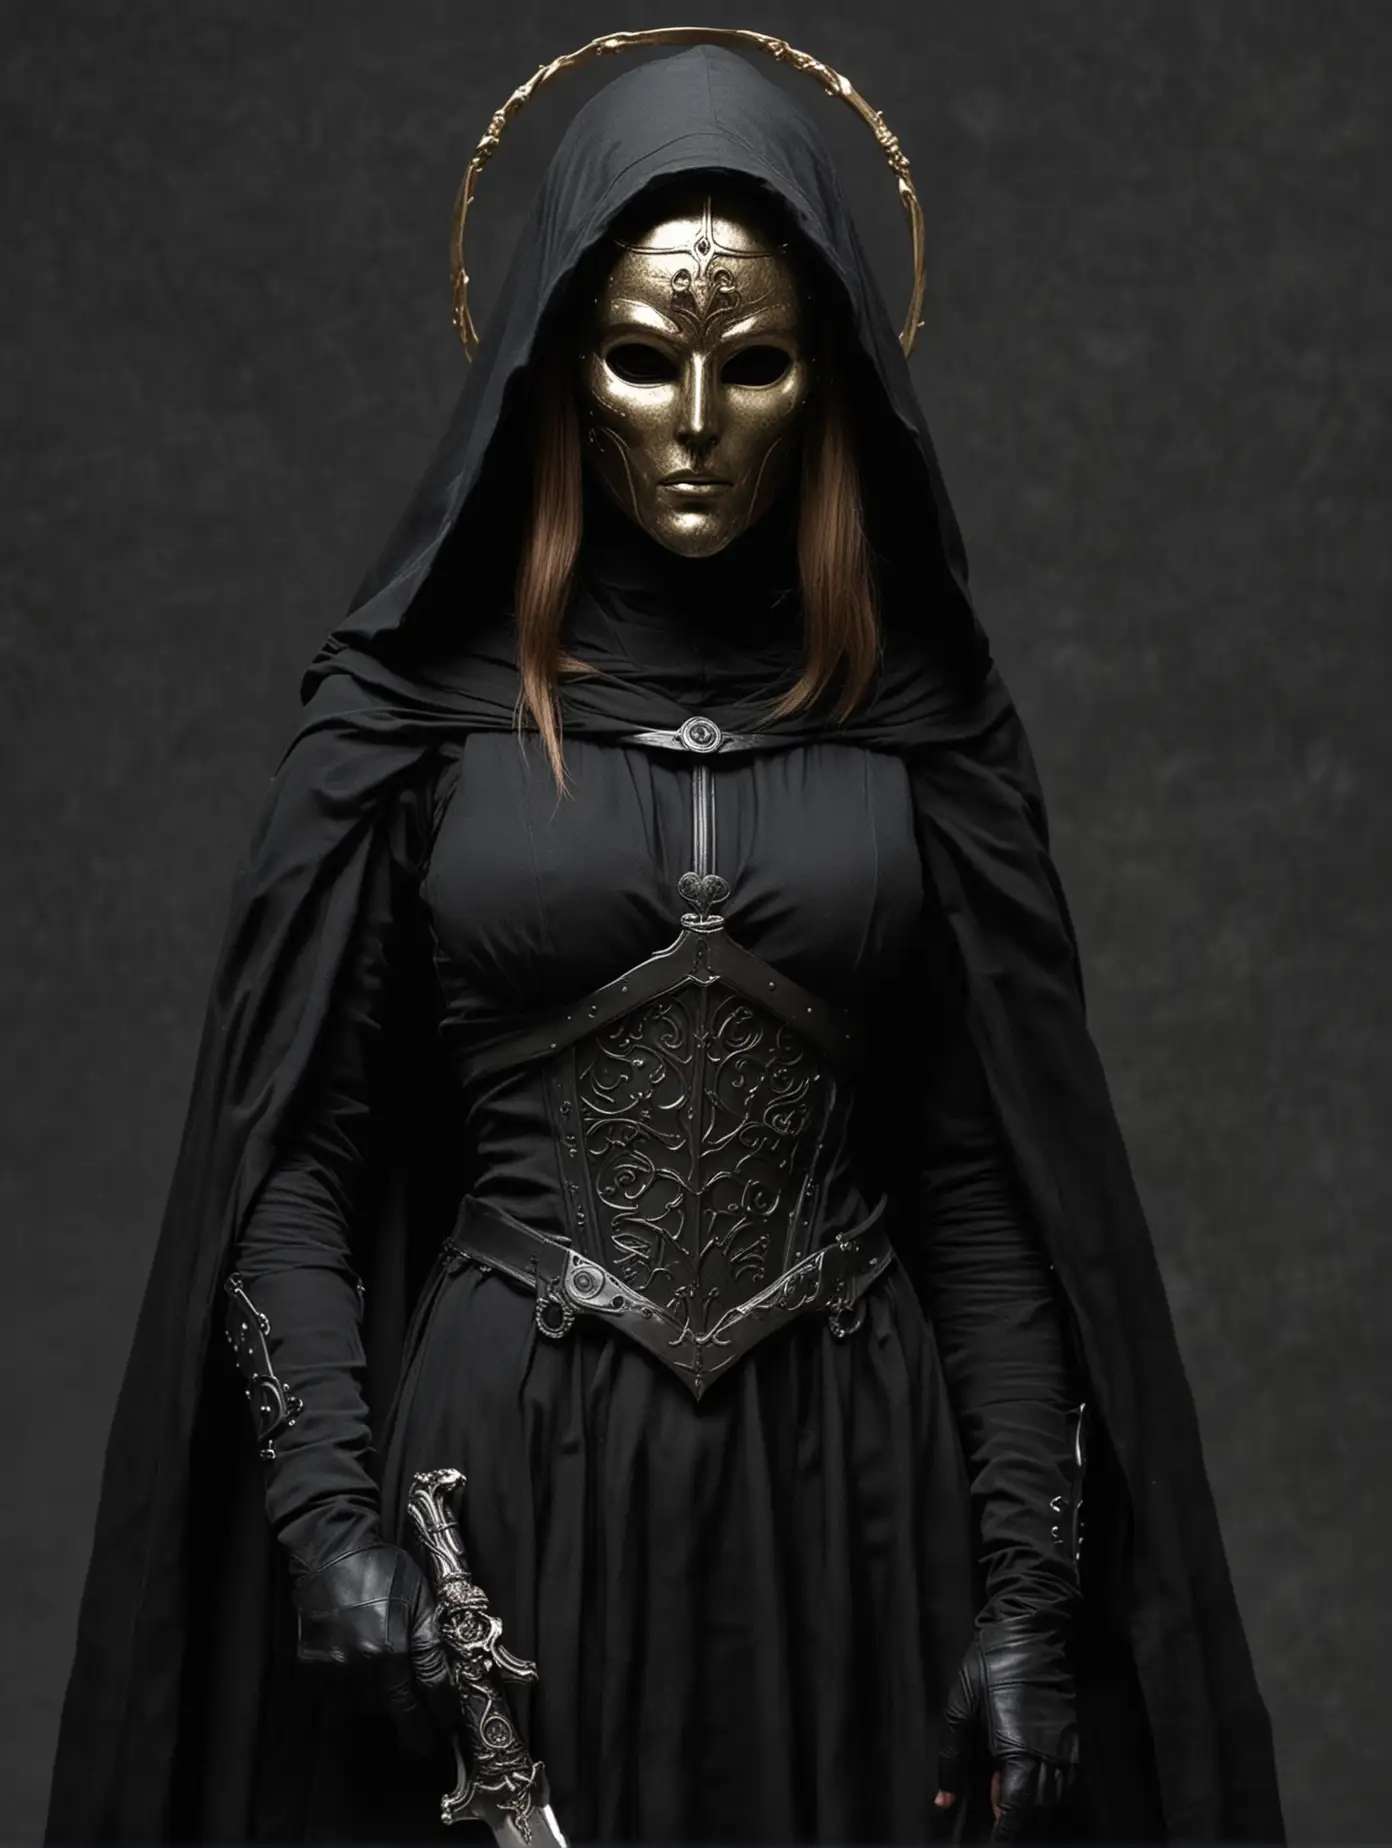 Mysterious-Sister-Bene-Gesserit-with-Halo-Disk-and-Sword